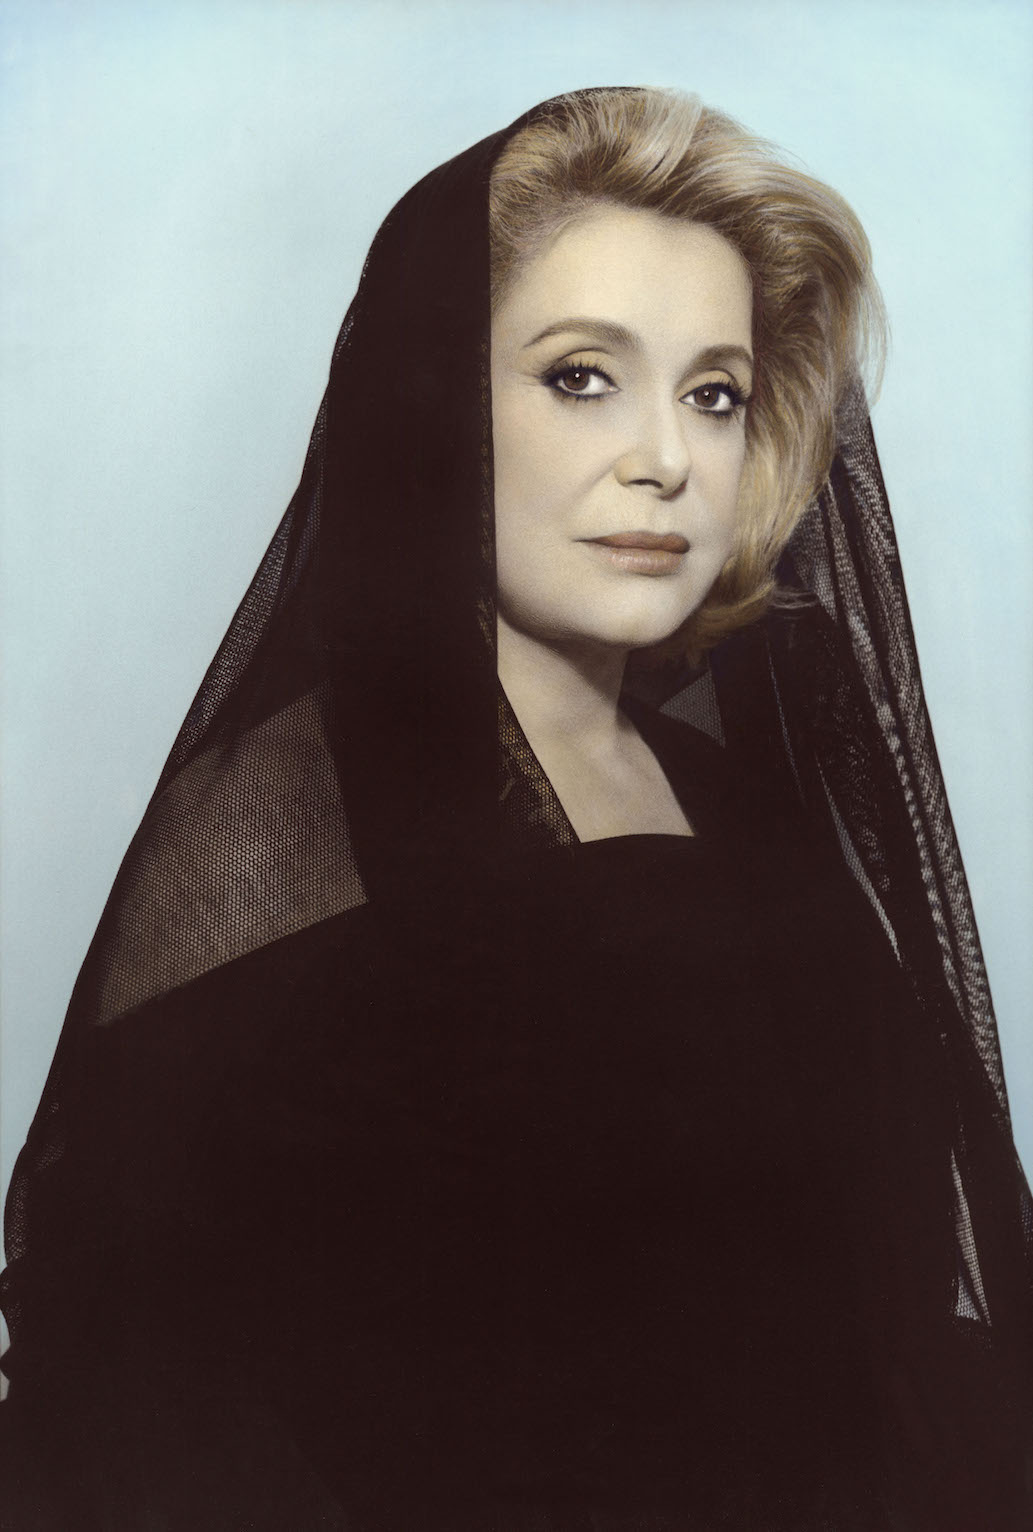 Youssef Nabil - Catherine Deneuve, Paris 2010 Hand colored gelatin silver print Courtesy of the Artist and Nathalie Obadia Gallery, Paris/ Brussels